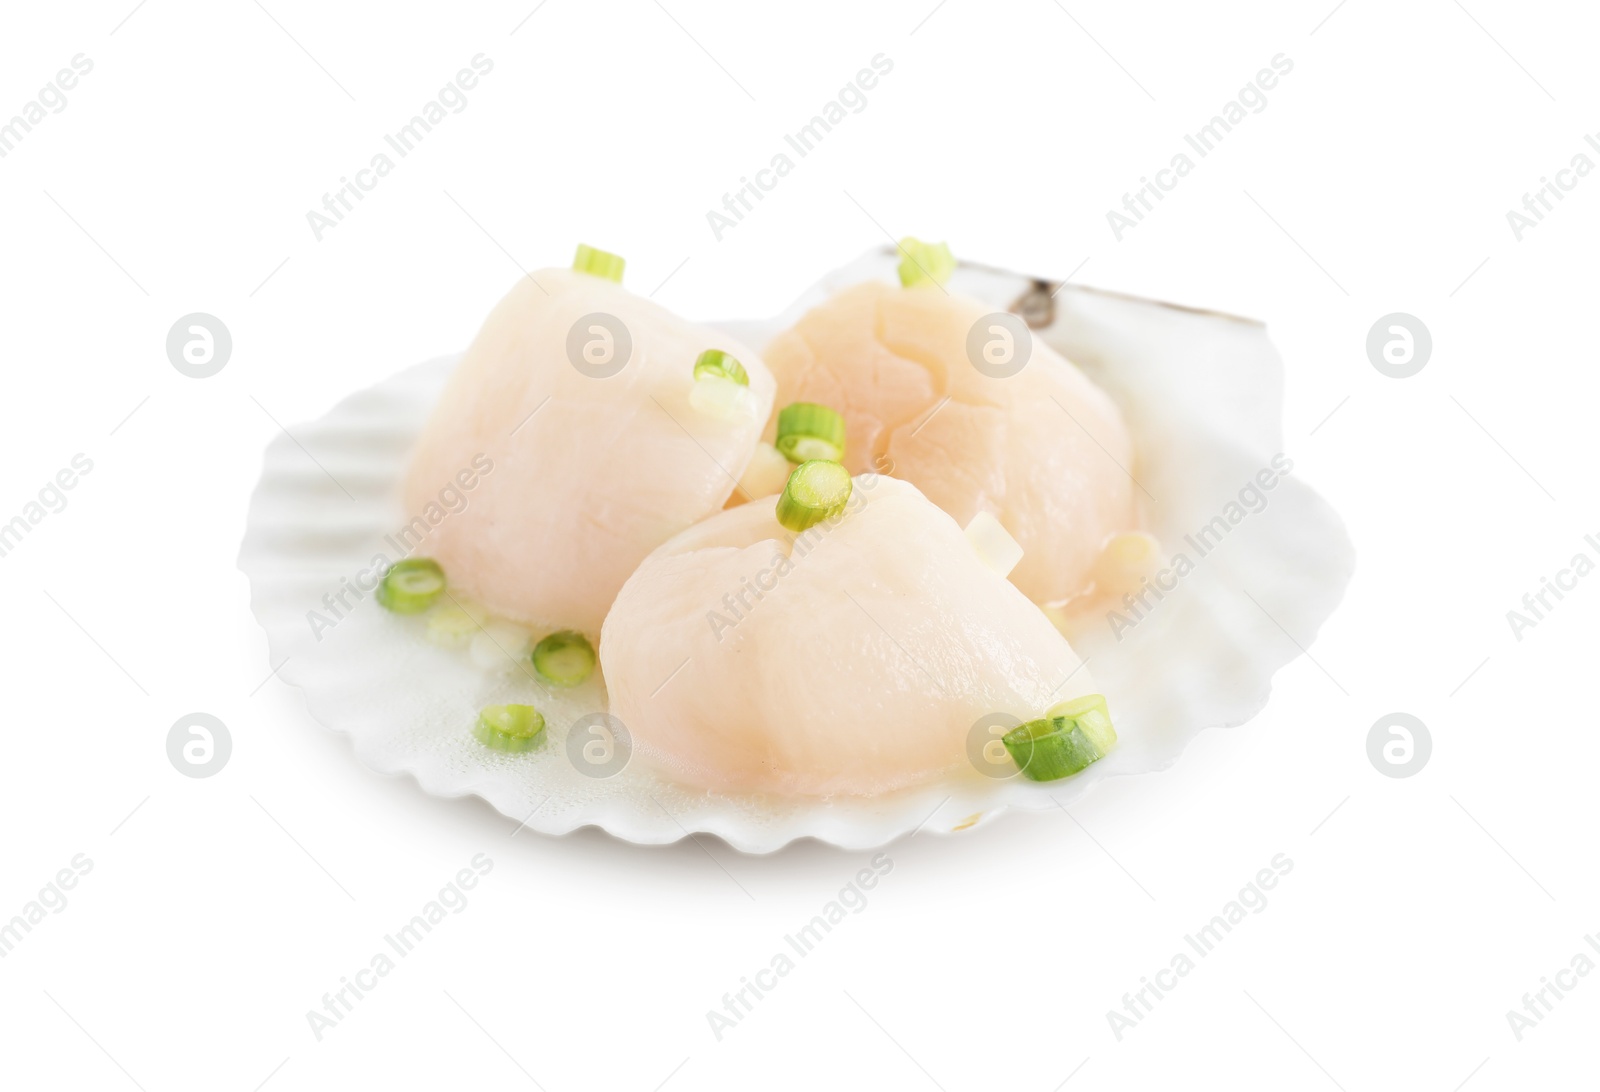 Photo of Raw scallops with green onion and shell isolated on white